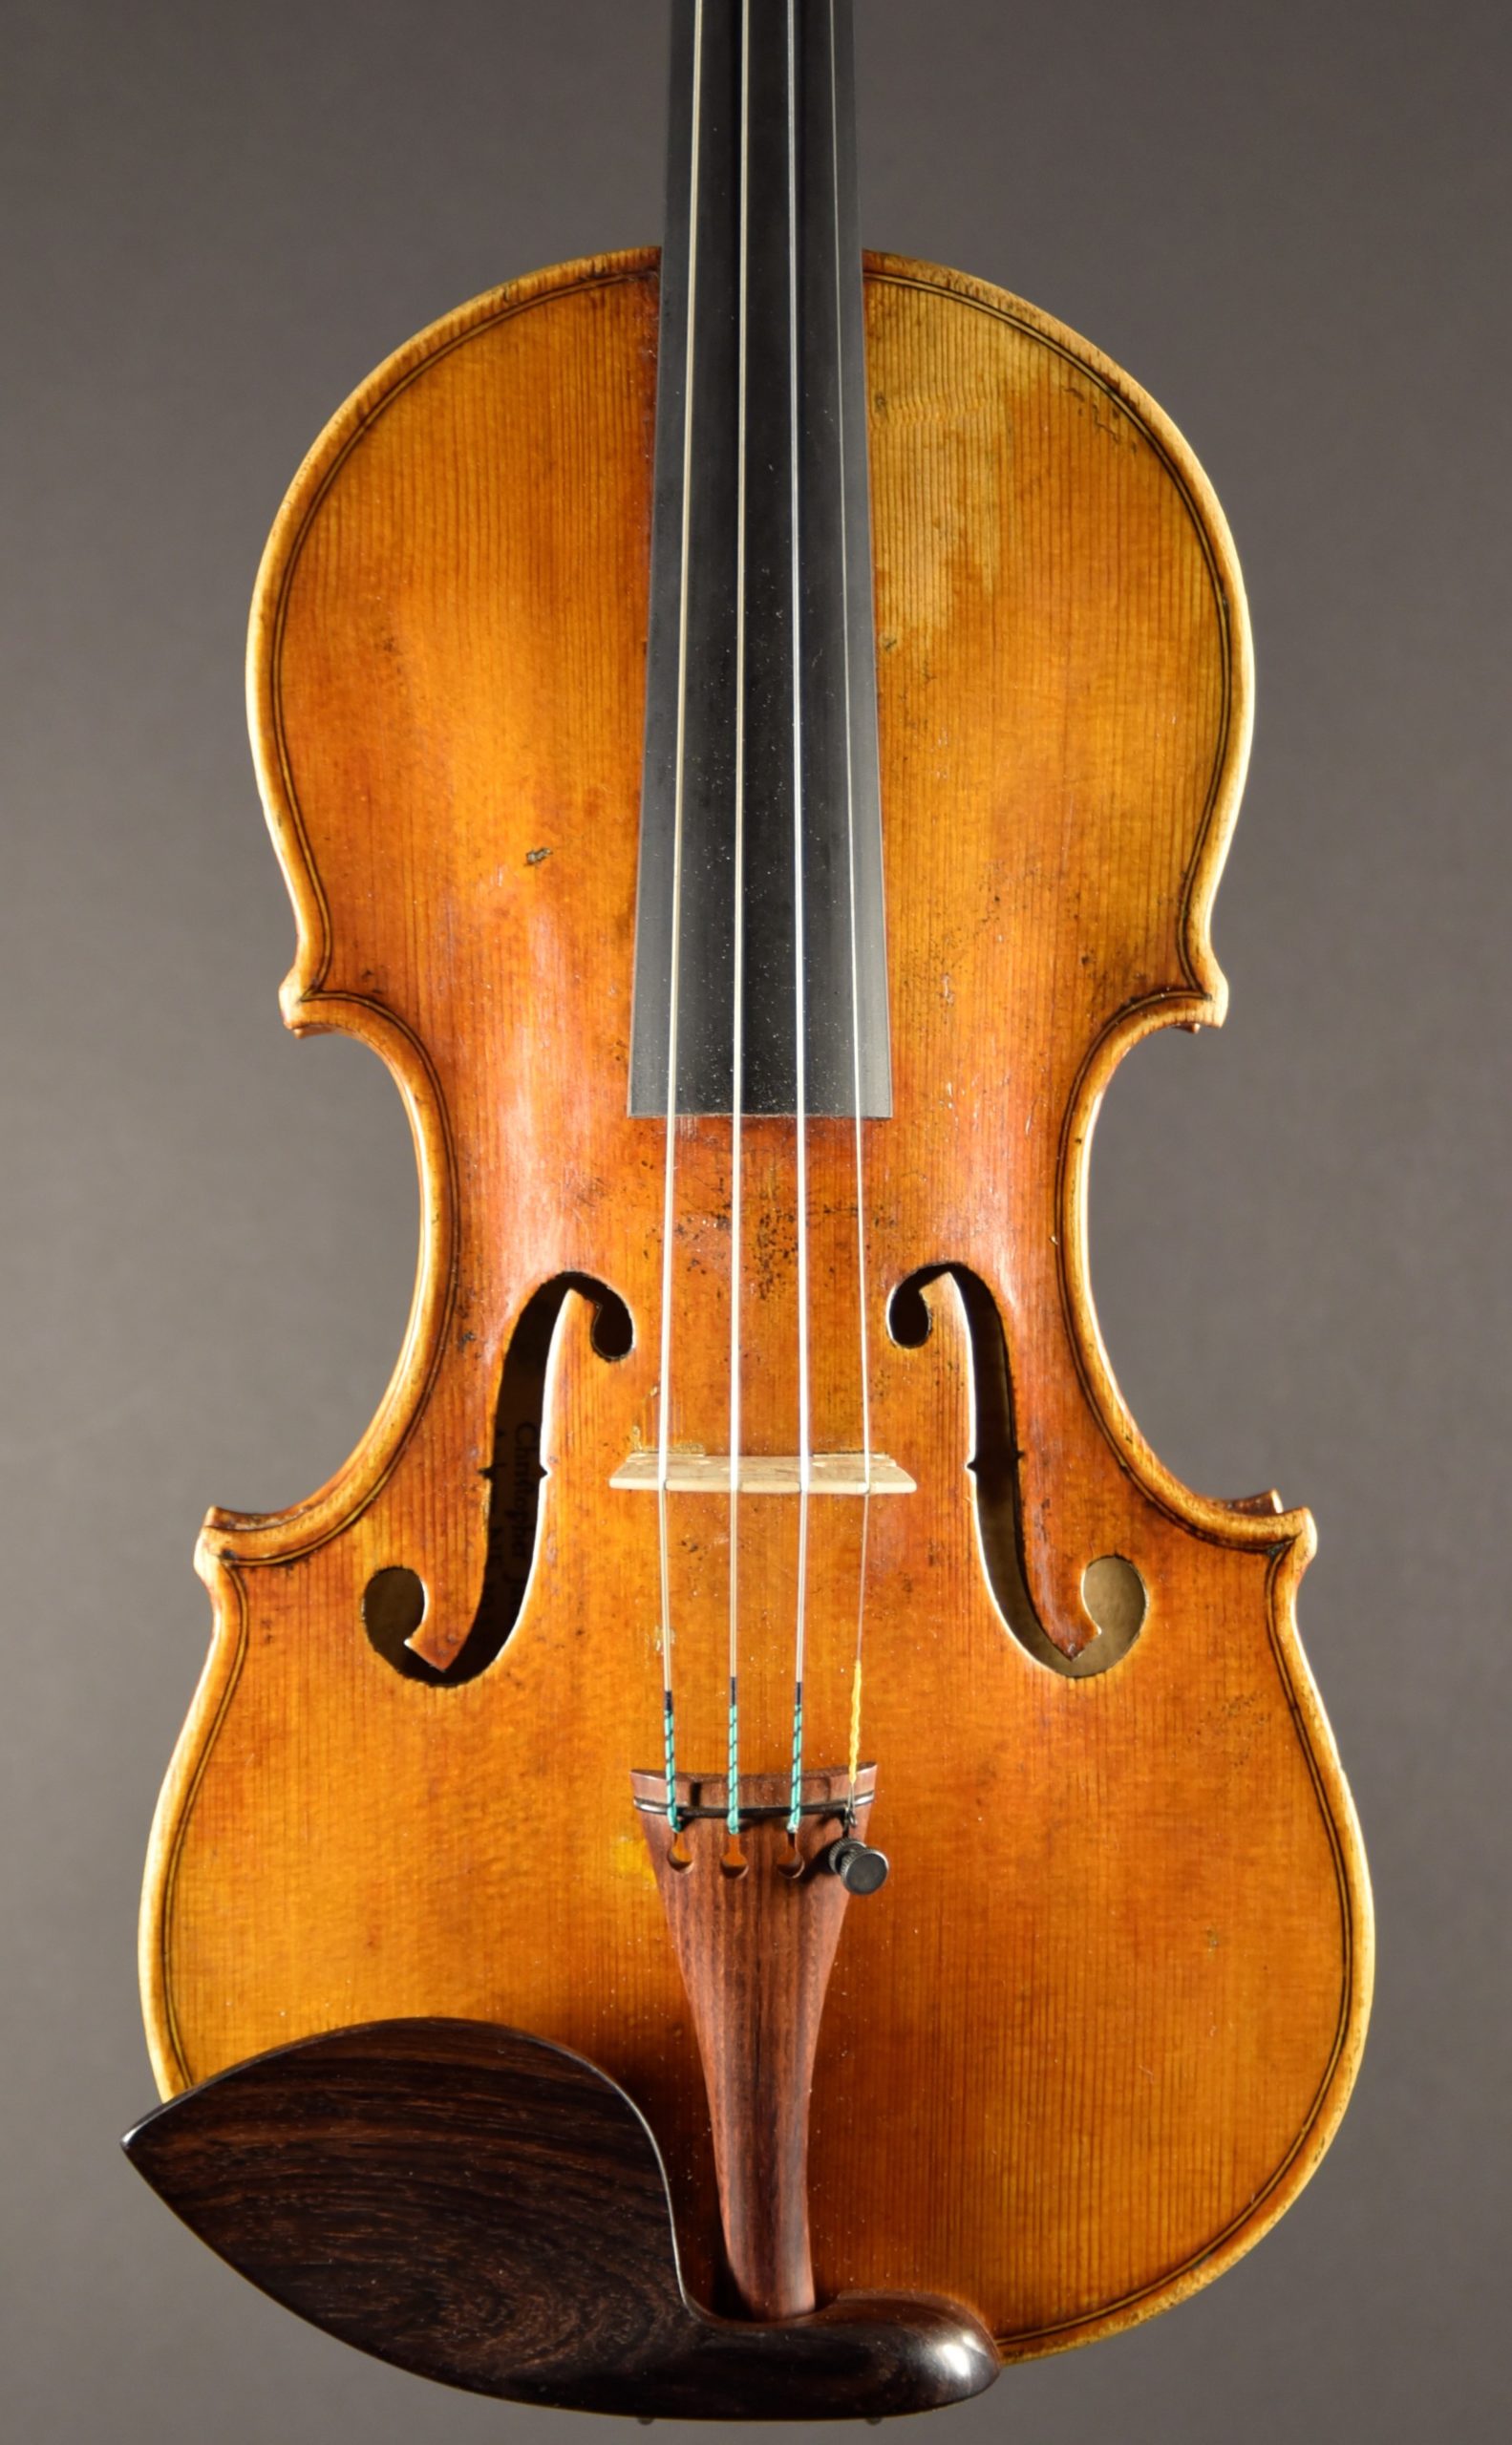 C7408 44 Violin labeled Christopher Jacoby, Auburn NE, 2017 Front edited